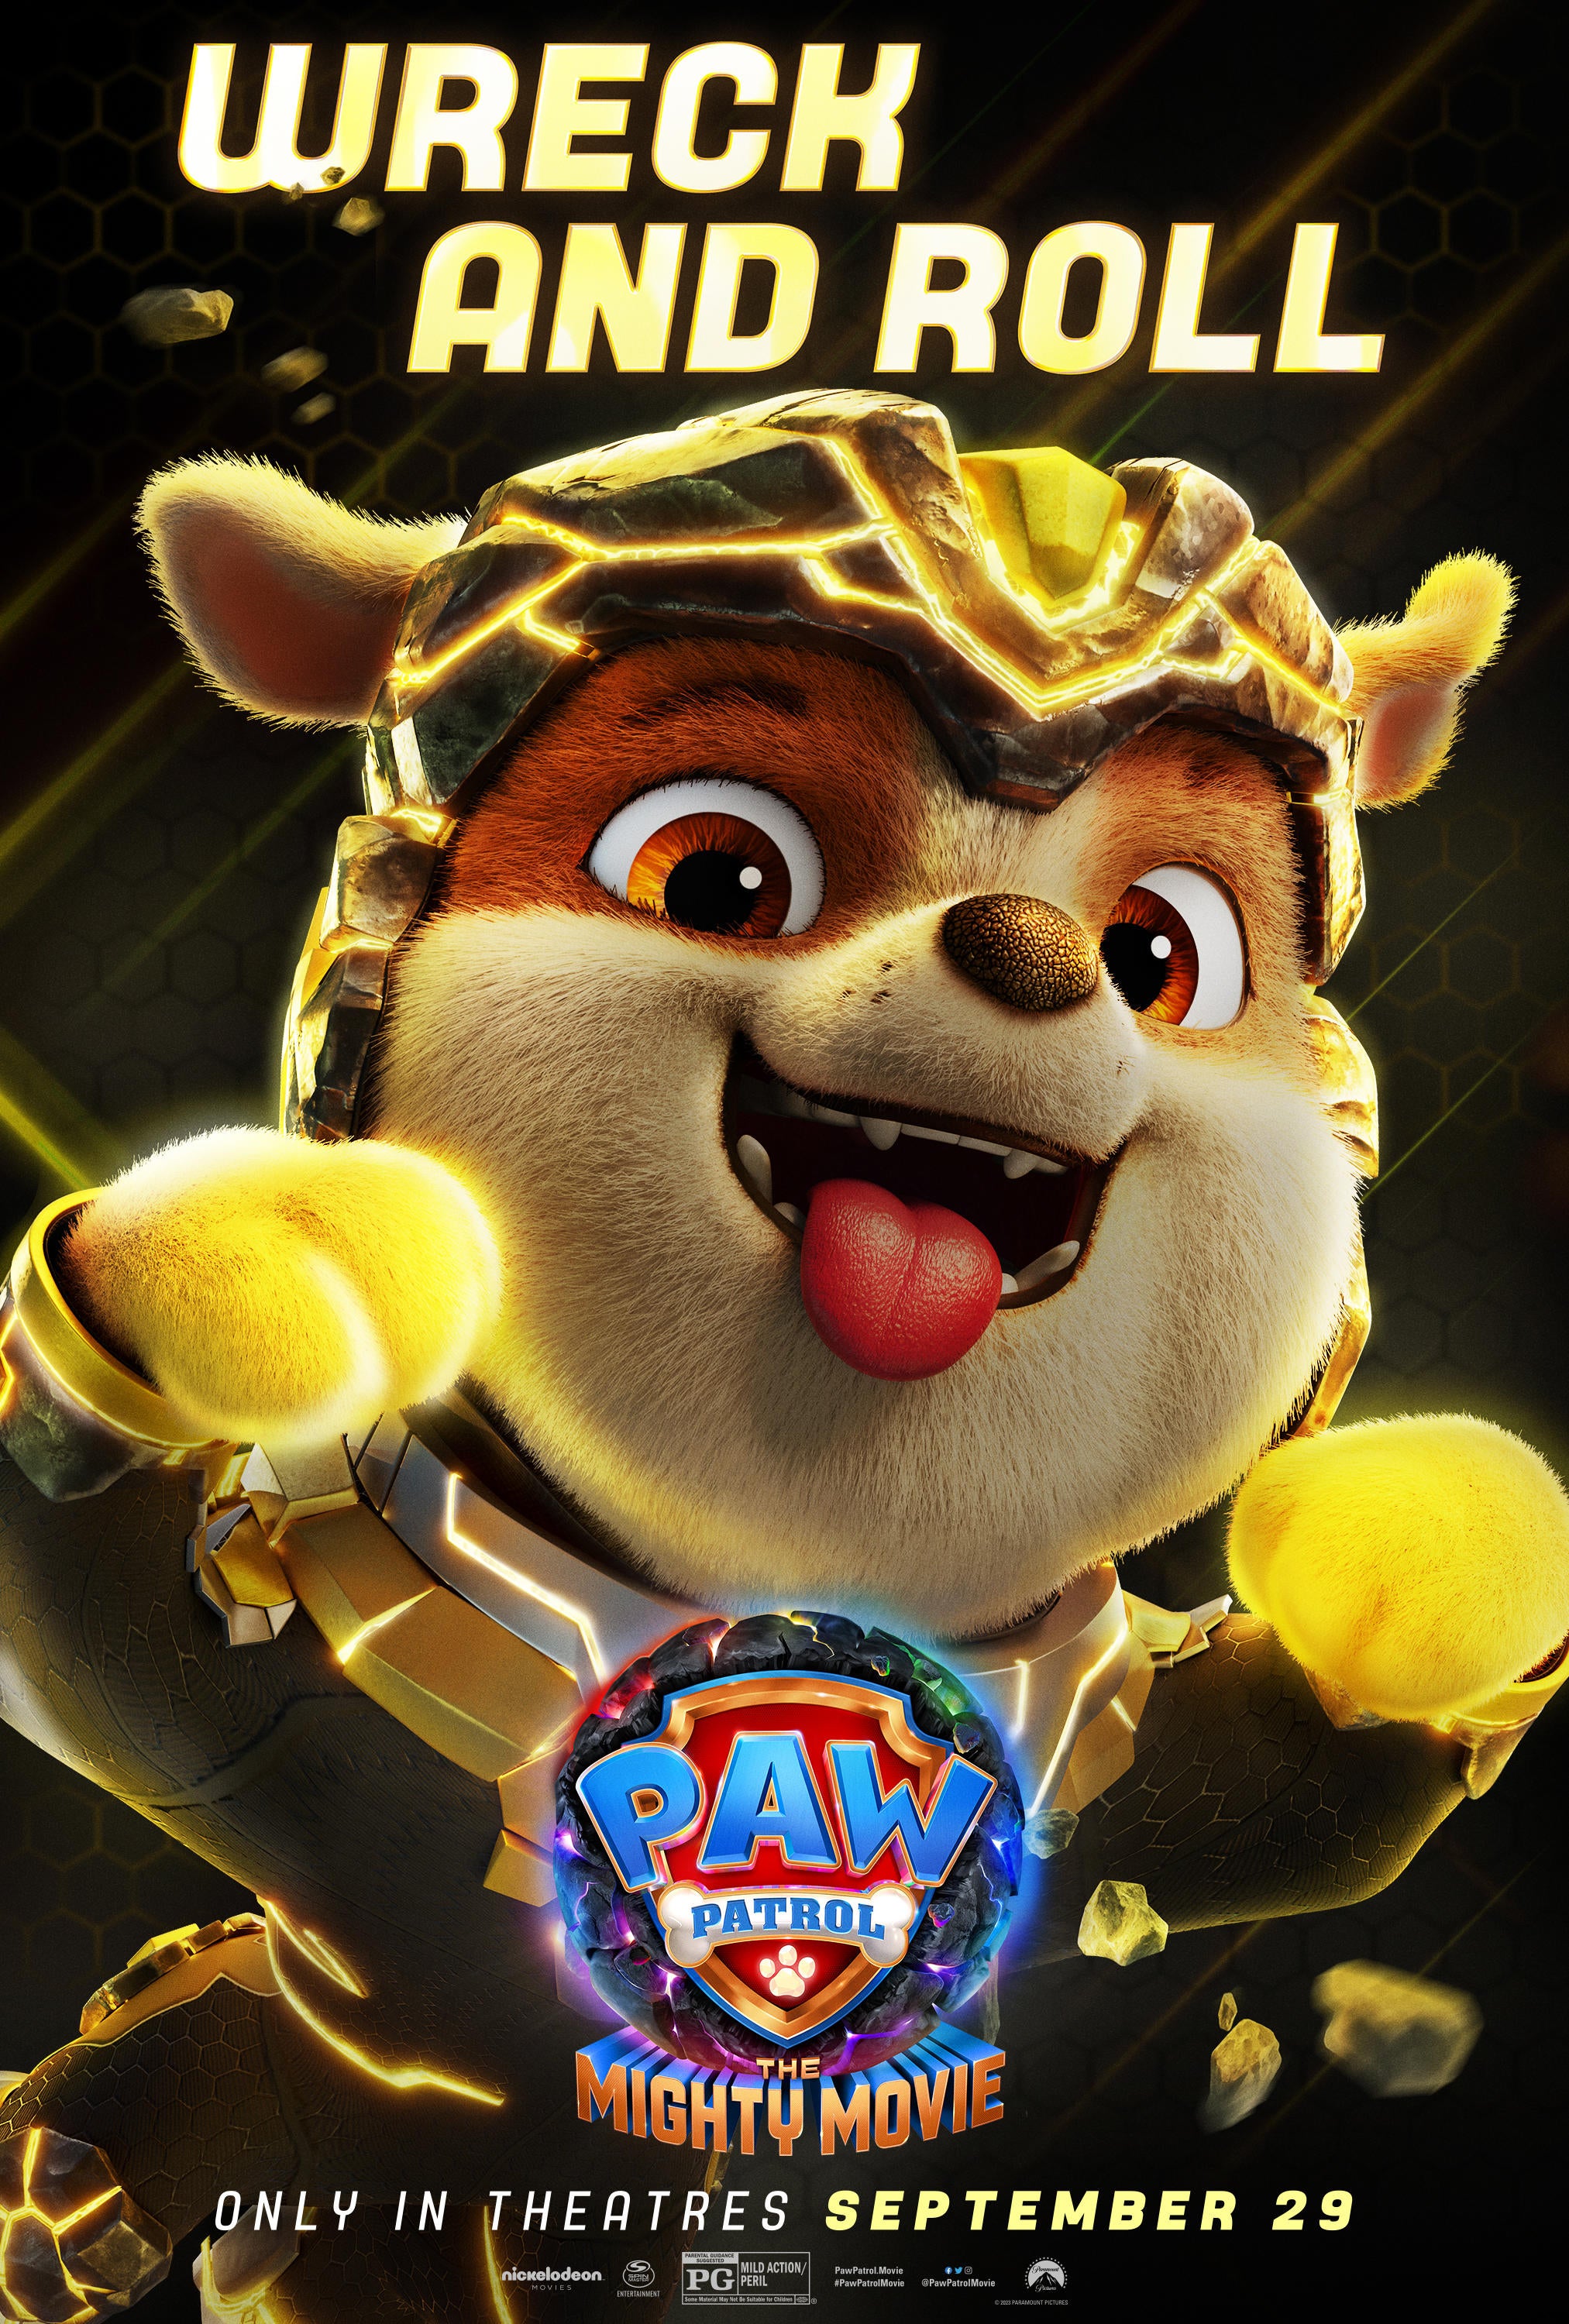 PAW Patrol: The Mighty Movie Character Posters: Rubble